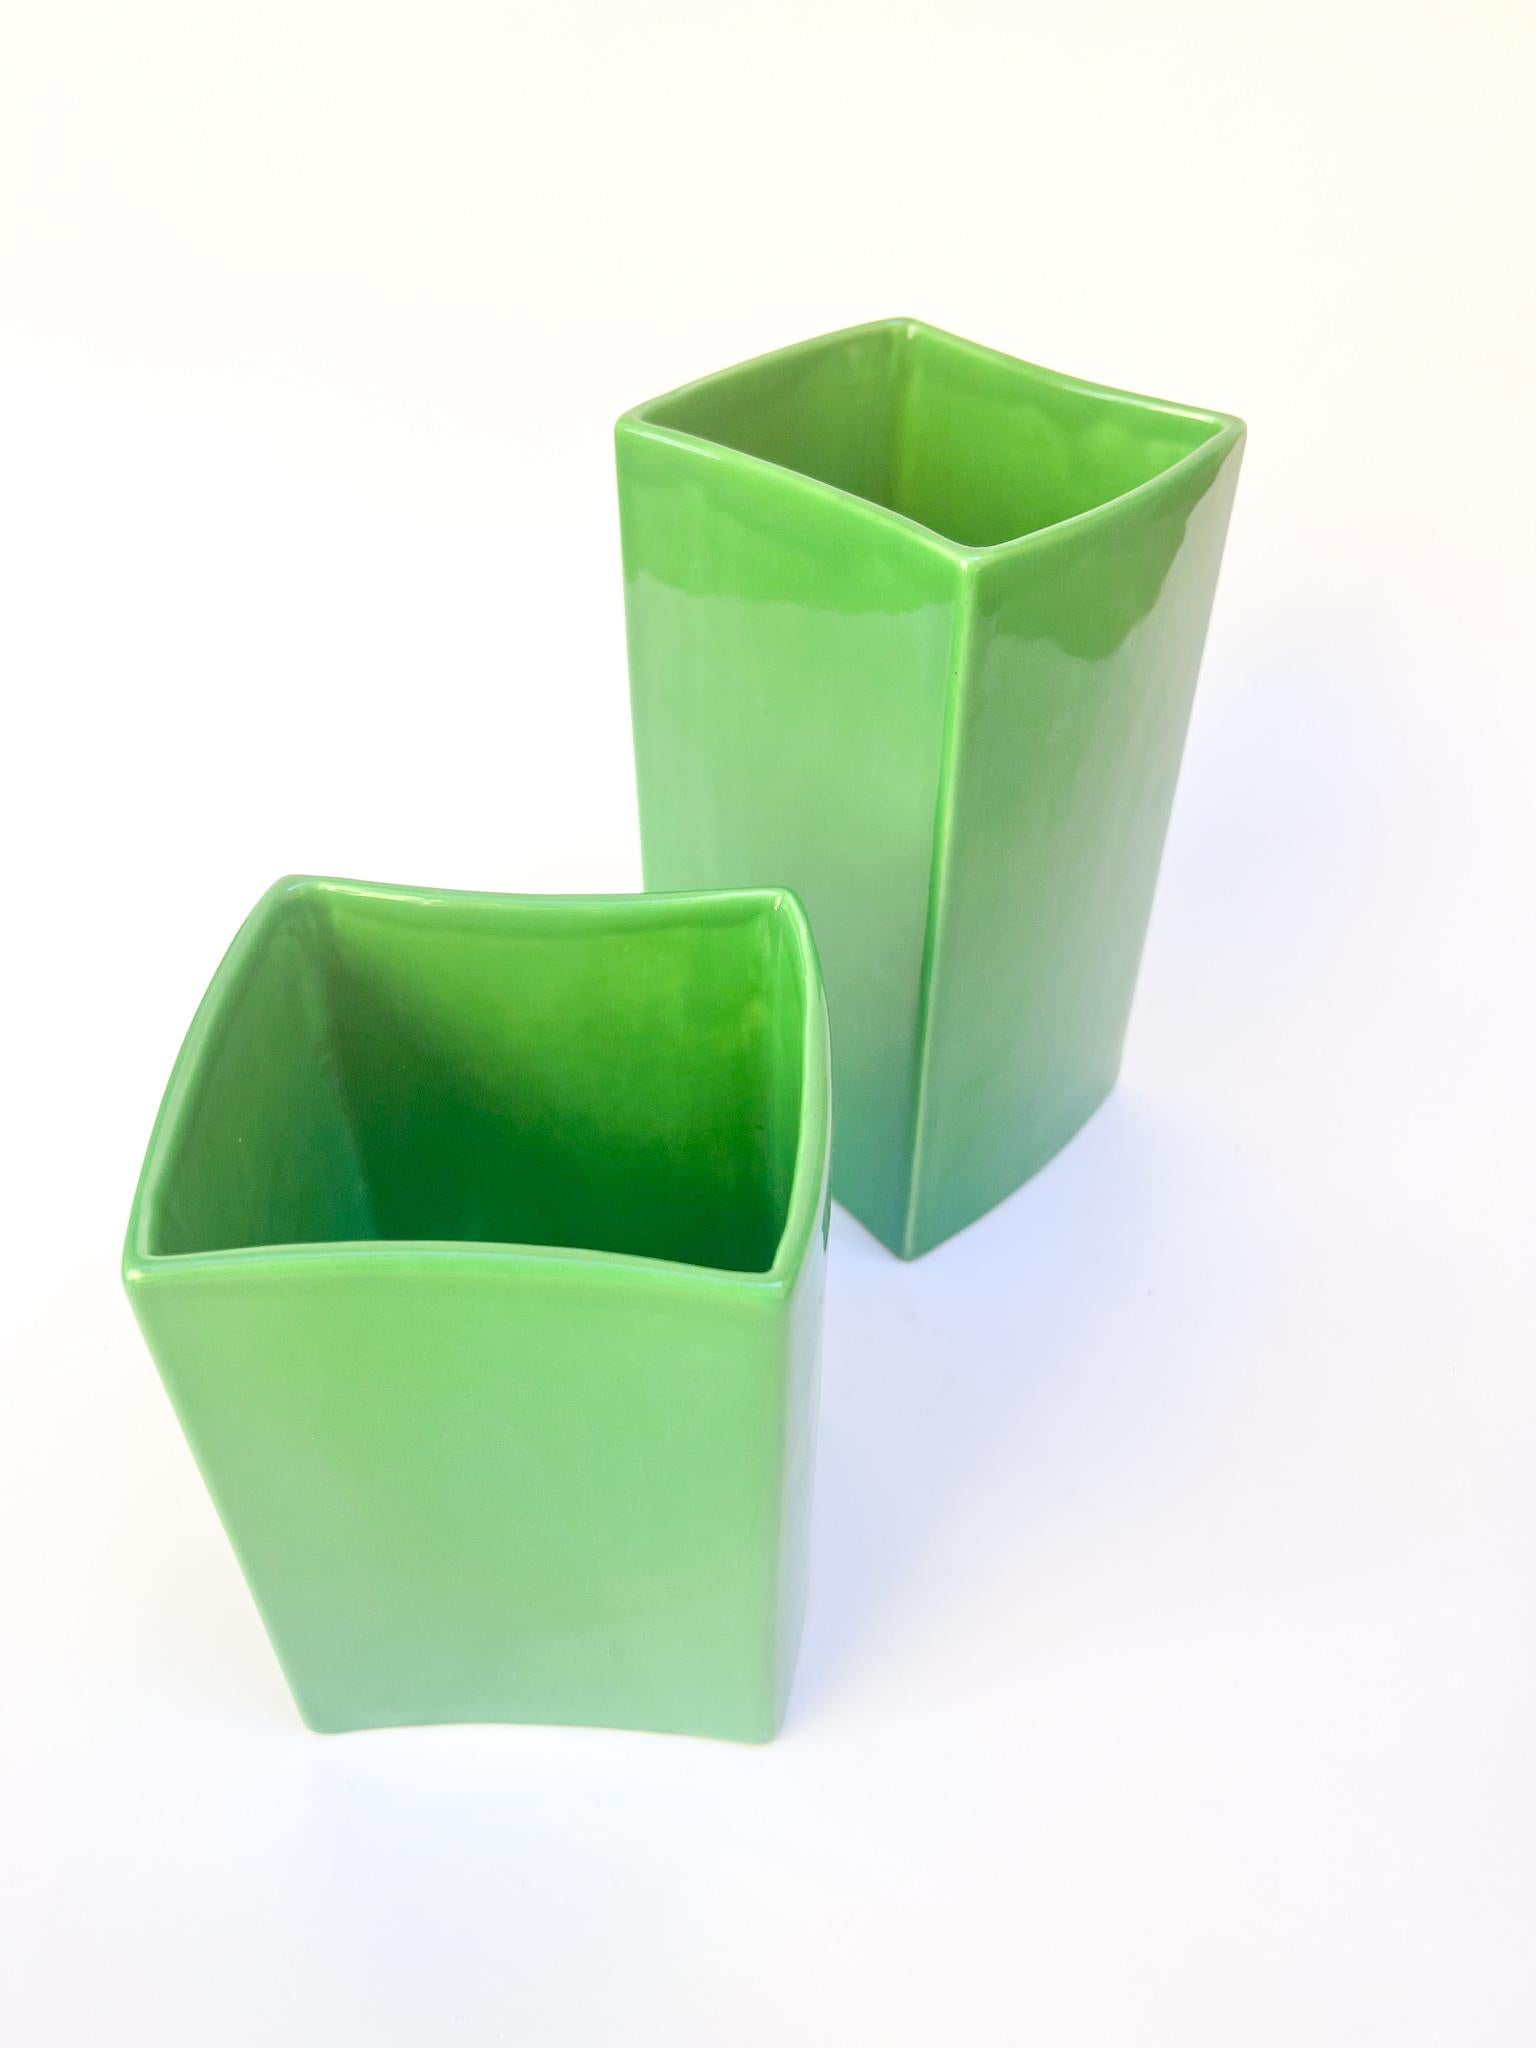 Pair of green vases by Franco Bettonica for Ceramica Gabbianelli, made in the 1970s.

Big one: Ø cm 11.5 Ø cm 10 H cm 20
Small one: Ø cm 11.5 Ø cm 10 H cm 15

Both vases have a tiny chip in one top angle. Additional pictures can be send upon